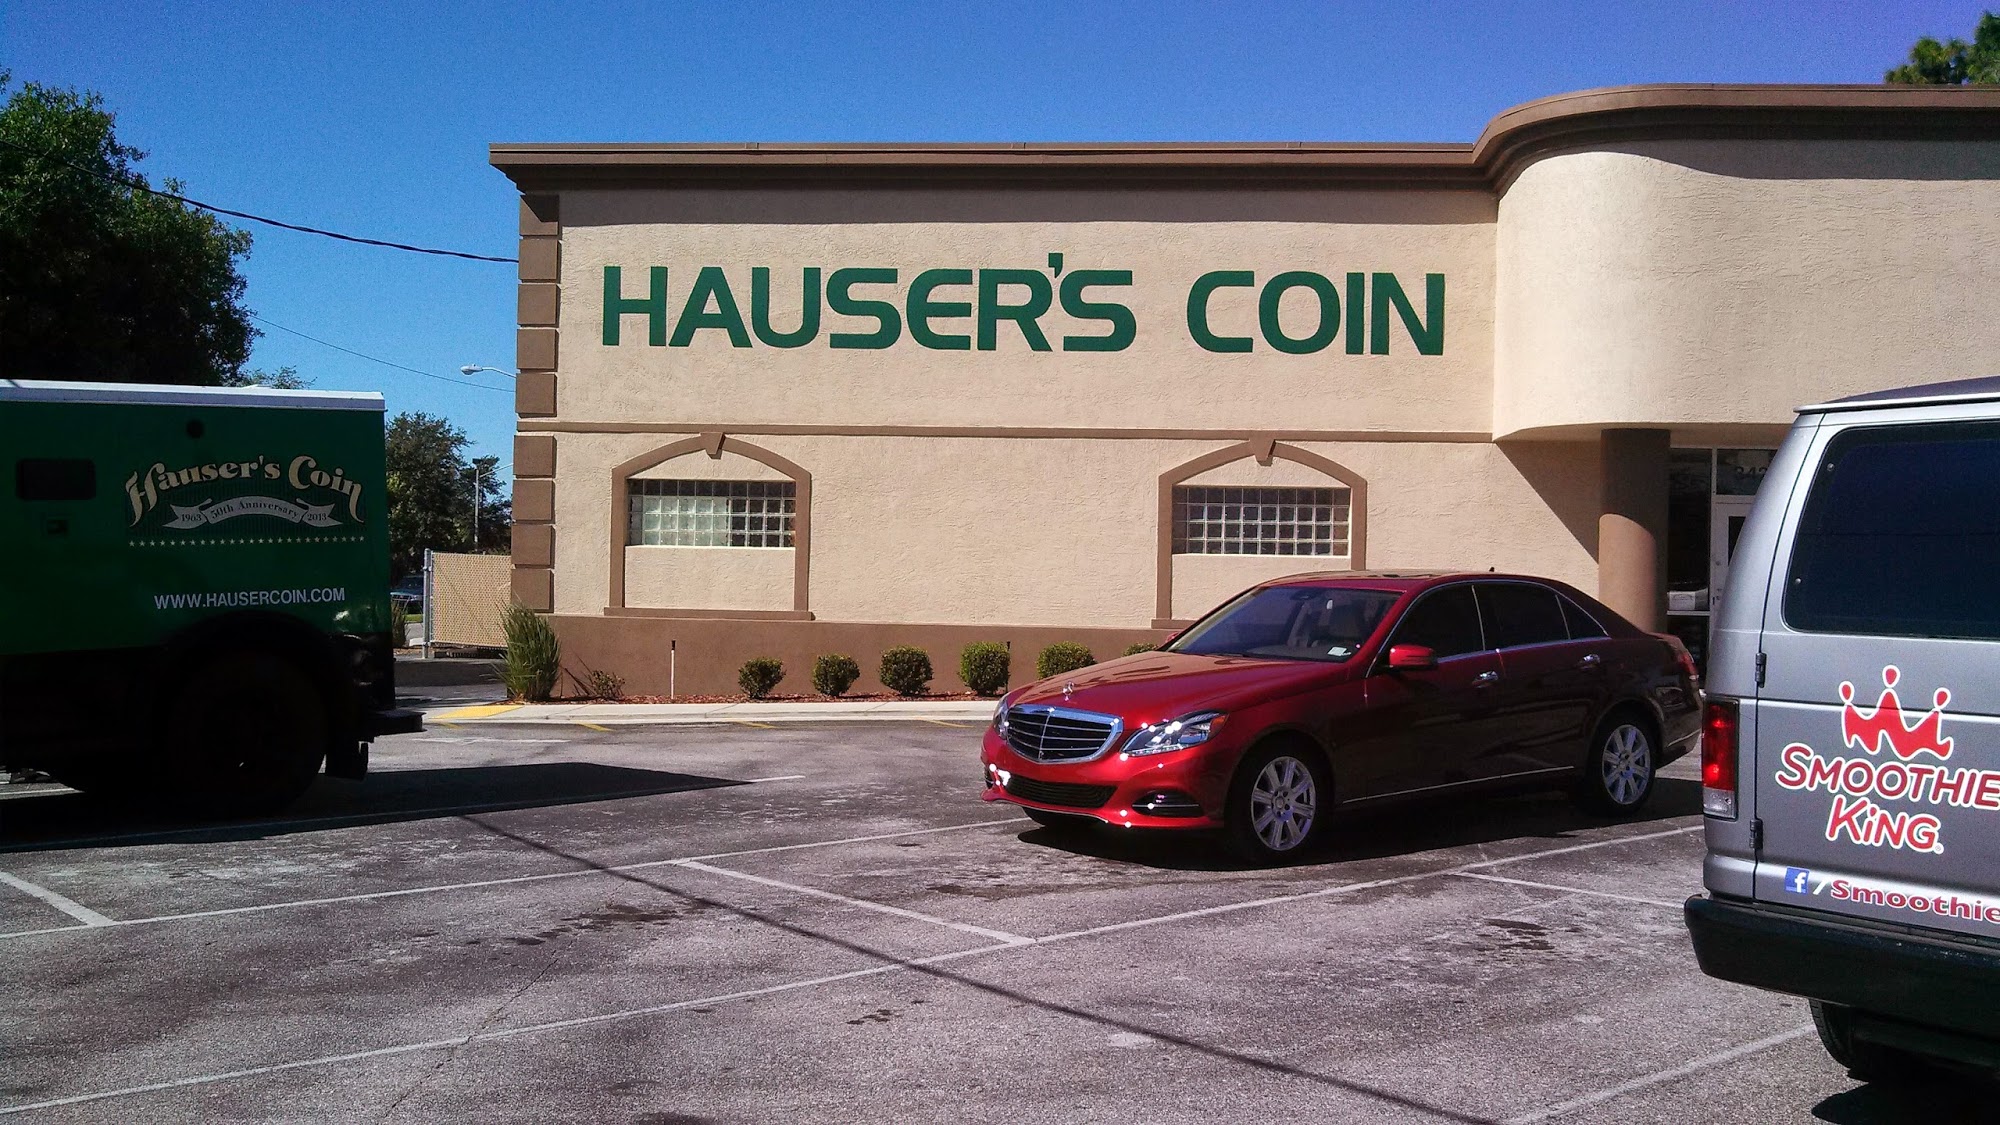 Hauser's Coin Co